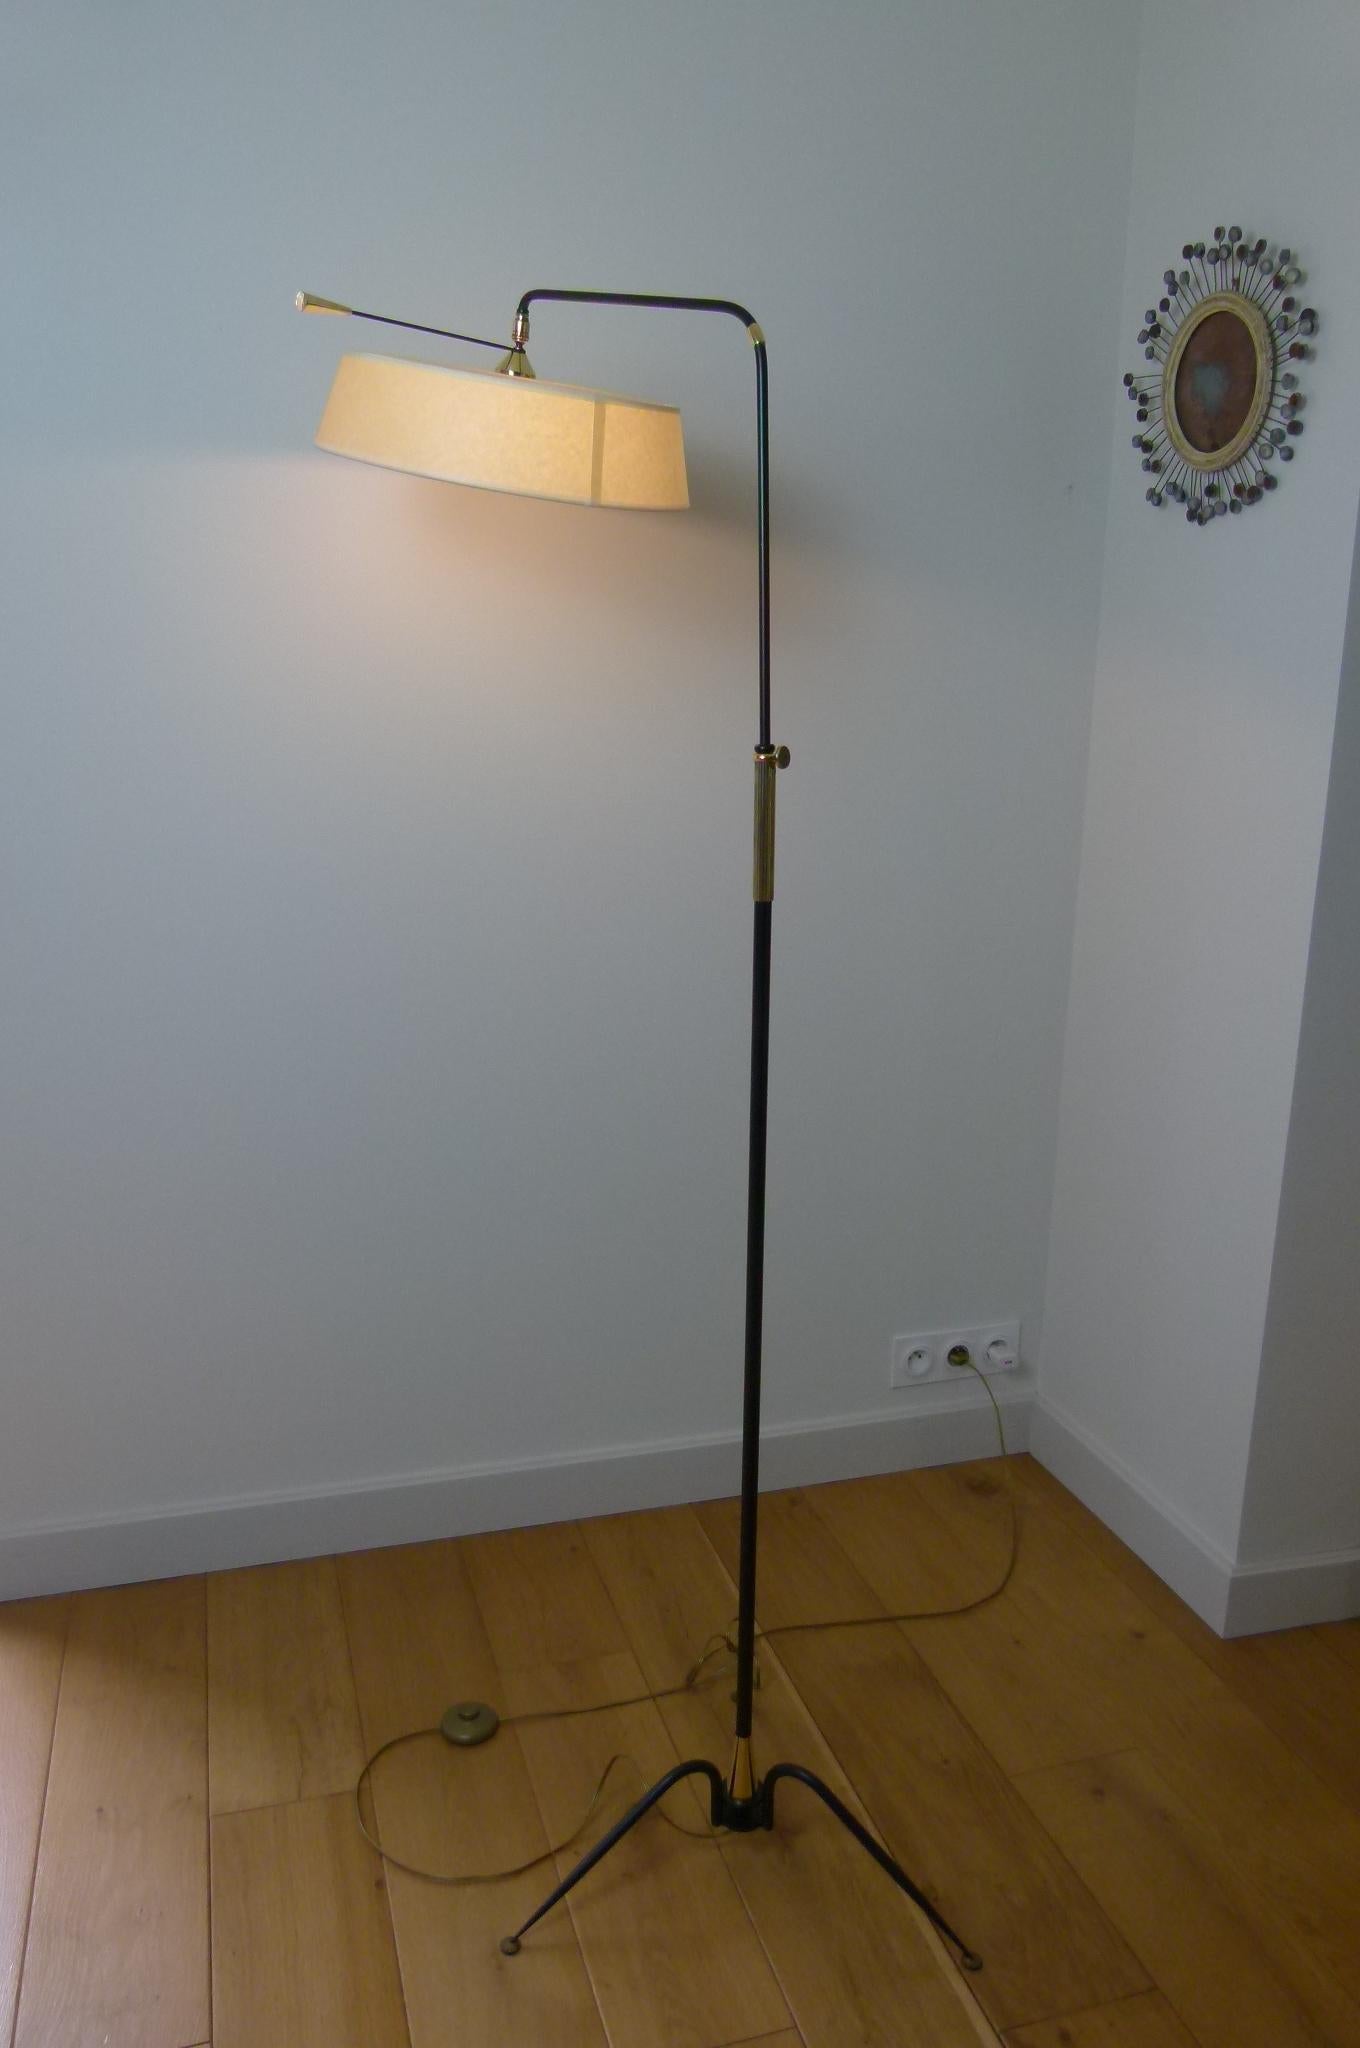 Floor lamp in black lacquered metal,
brass handle, adjustable light arm.
Shades fixed on a brass ball joint, to adjust the light.
French work circa 1950, from Maison Lunel
Perfect condition.
   